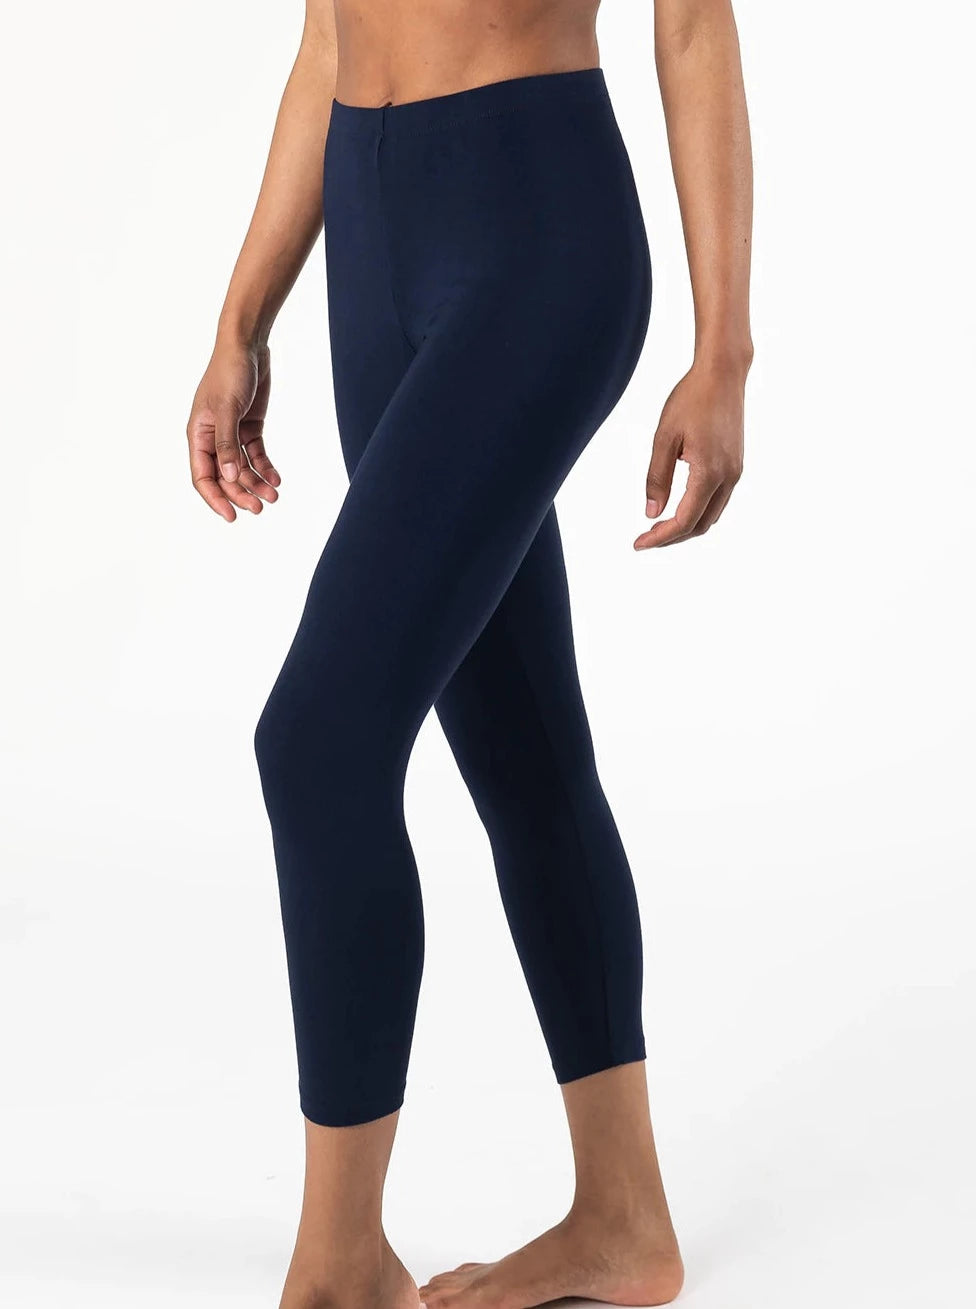 prAna Ashley Capri Legging - Women's-Blue Jay-Large — Inseam Size: 20 in,  Gender: Female, Age Group: Adults, Apparel Fit: Athletic, Color: Blue Jay —  W4AASH115-BLJY-L